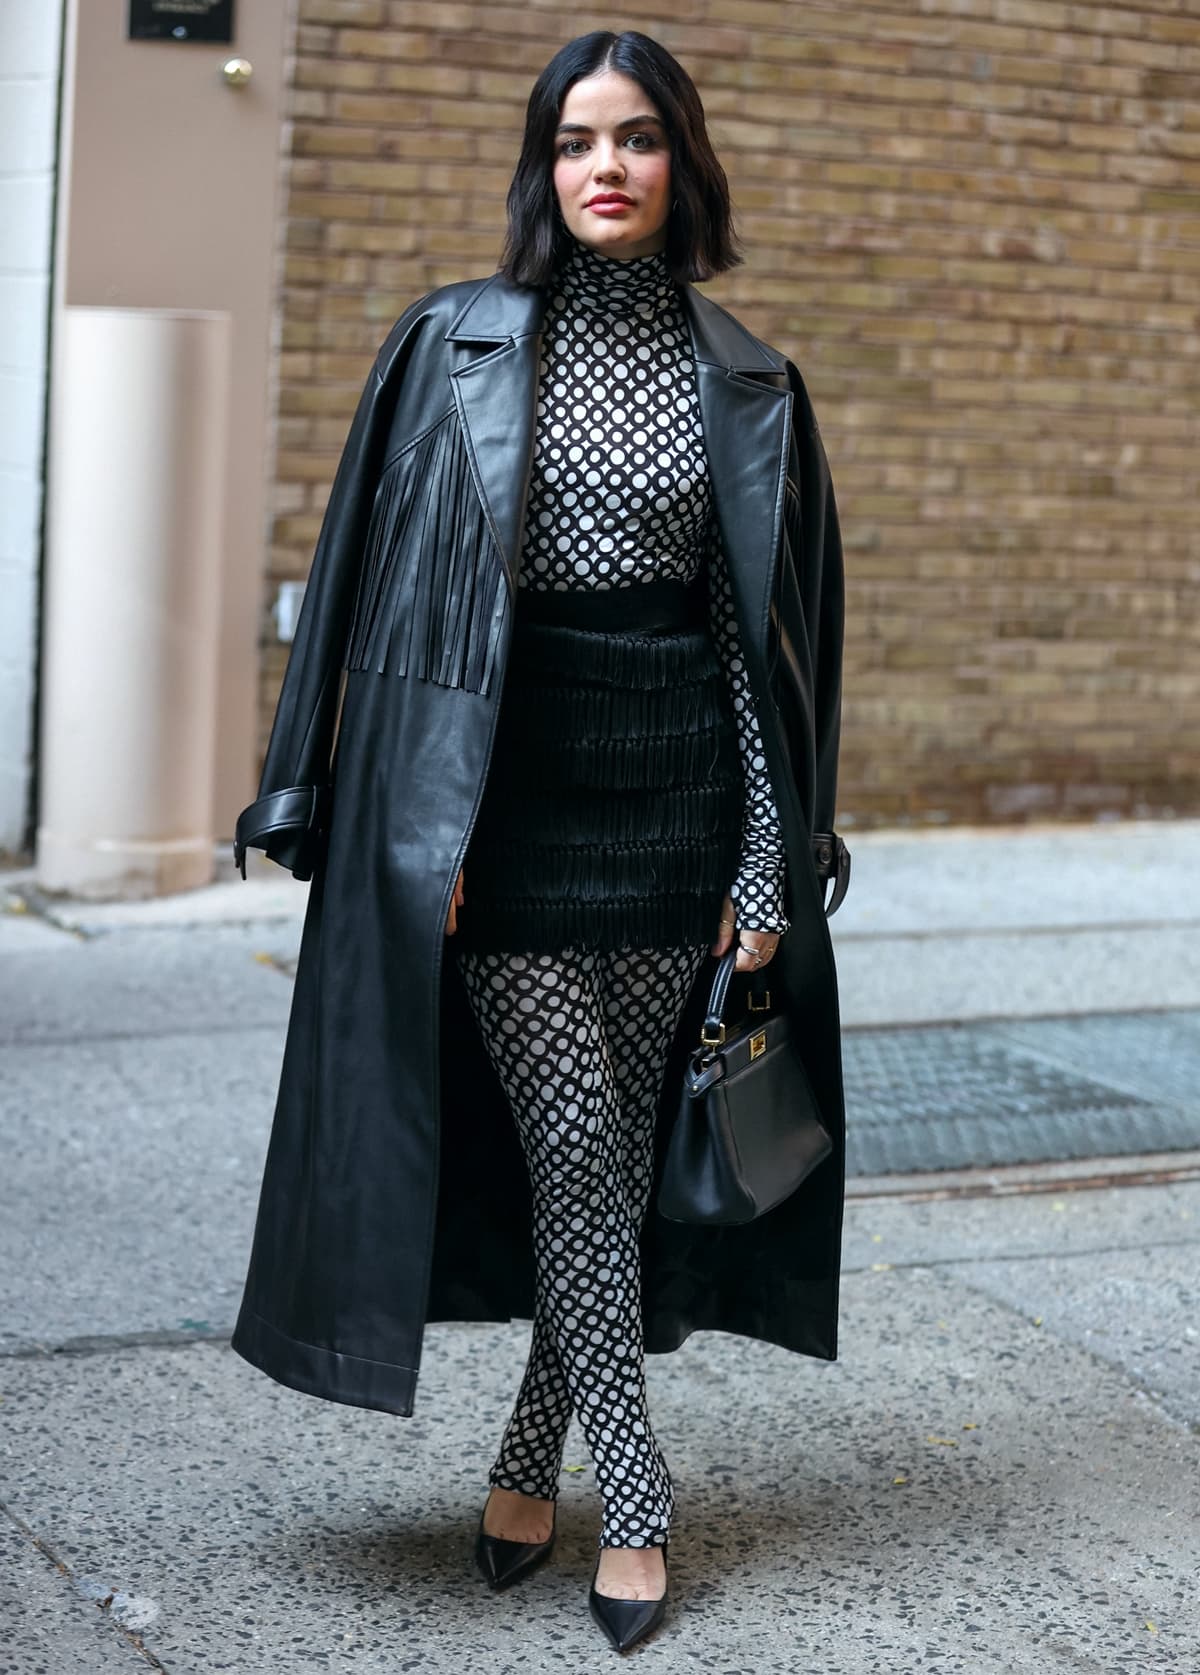 Lucy Hale's classic black coat from Jason Wu heads in a Western direction with its swingy fringe, while the faux leather fabrication delivers all the buttery goodness of the real thing